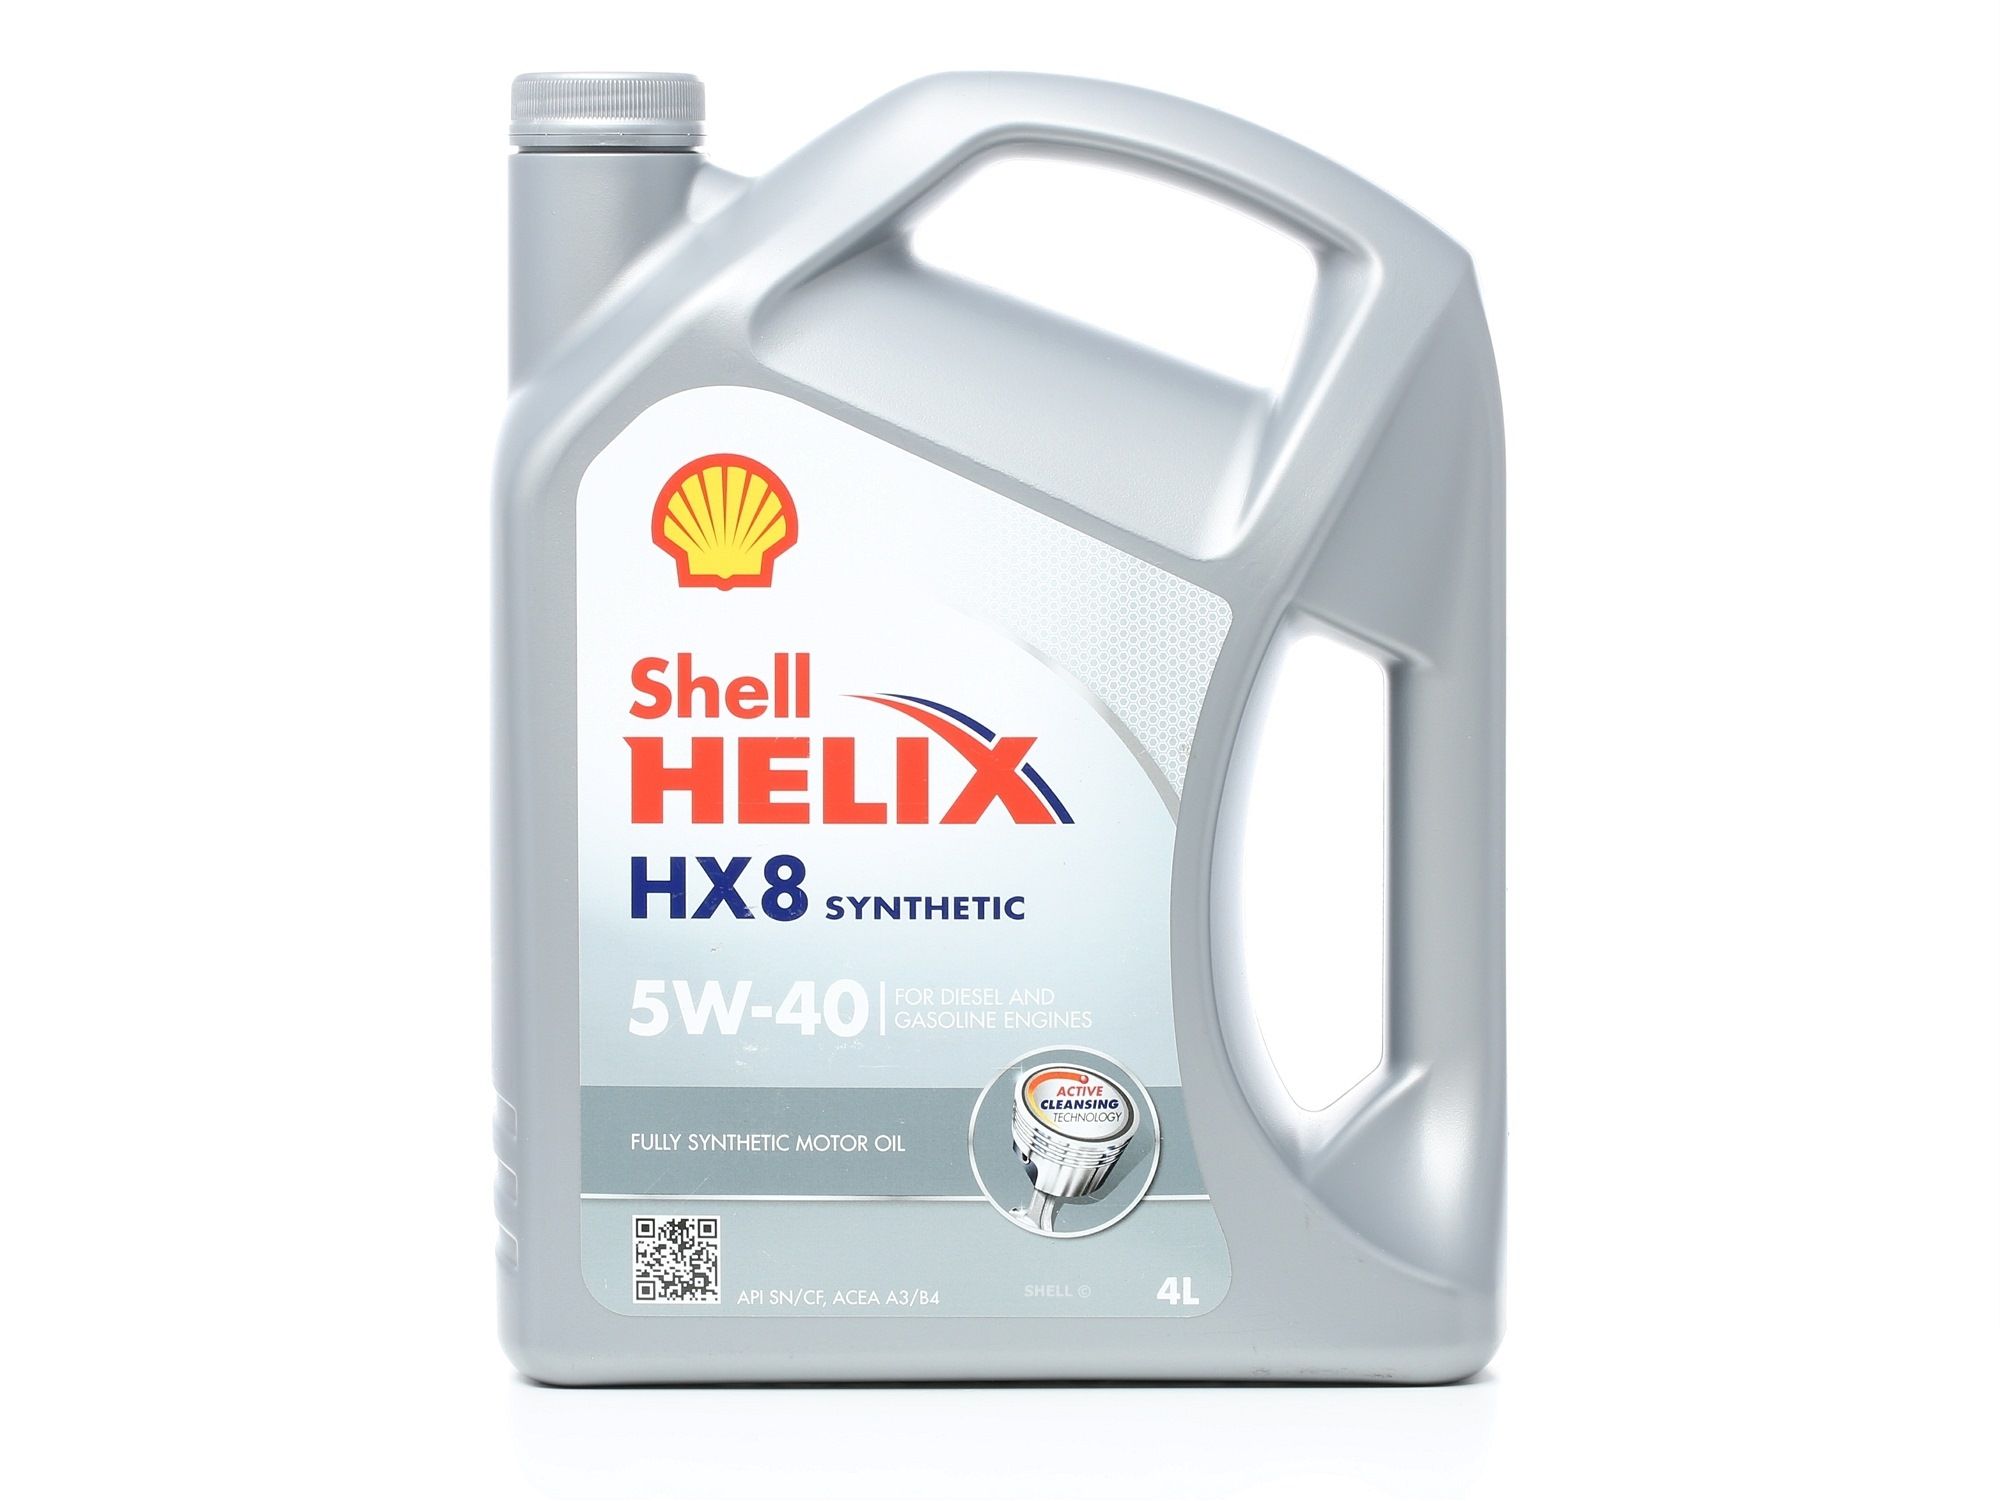 Buy Automobile oil SHELL petrol 550046291 Helix, HX8 5W-40, 4l, Synthetic Oil